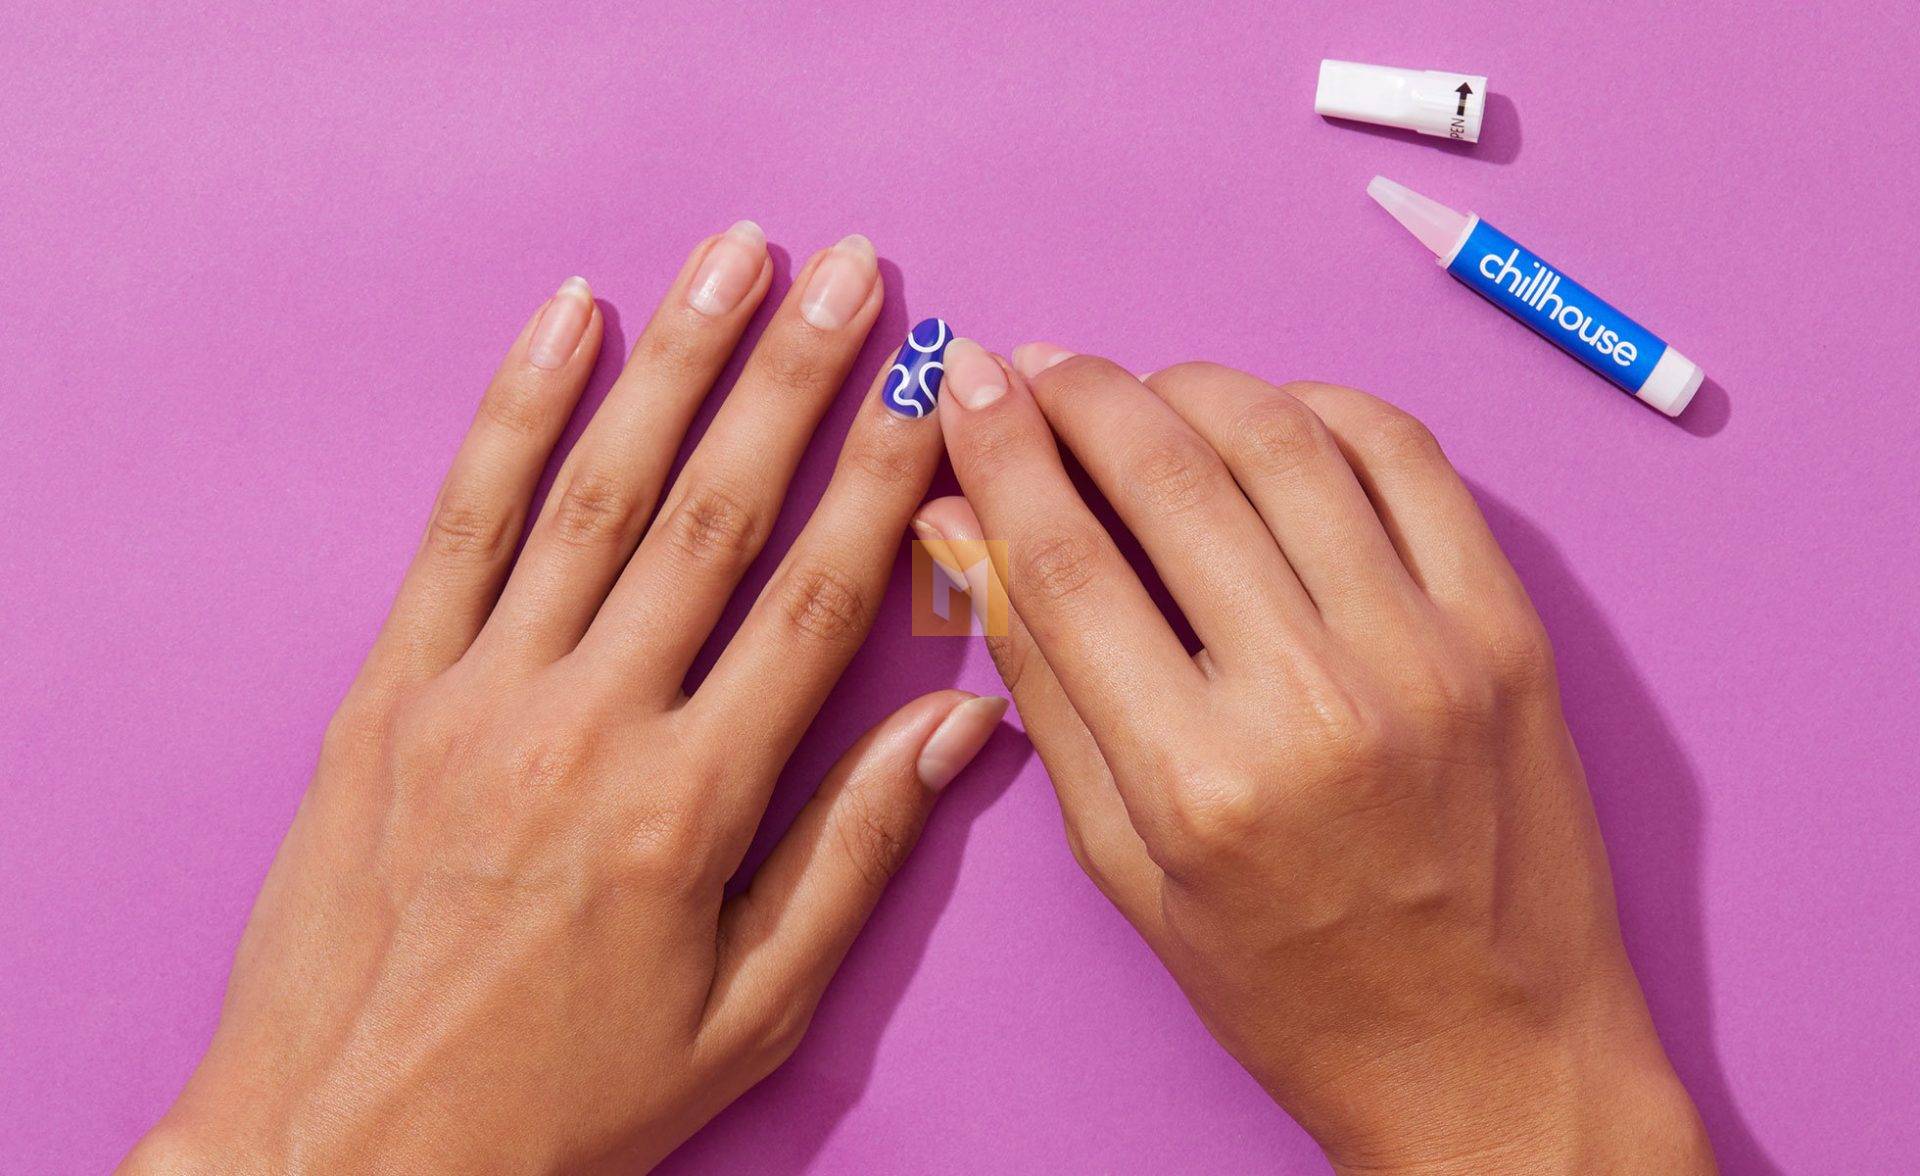 Tips and tricks to get the most out of your Chill house nails